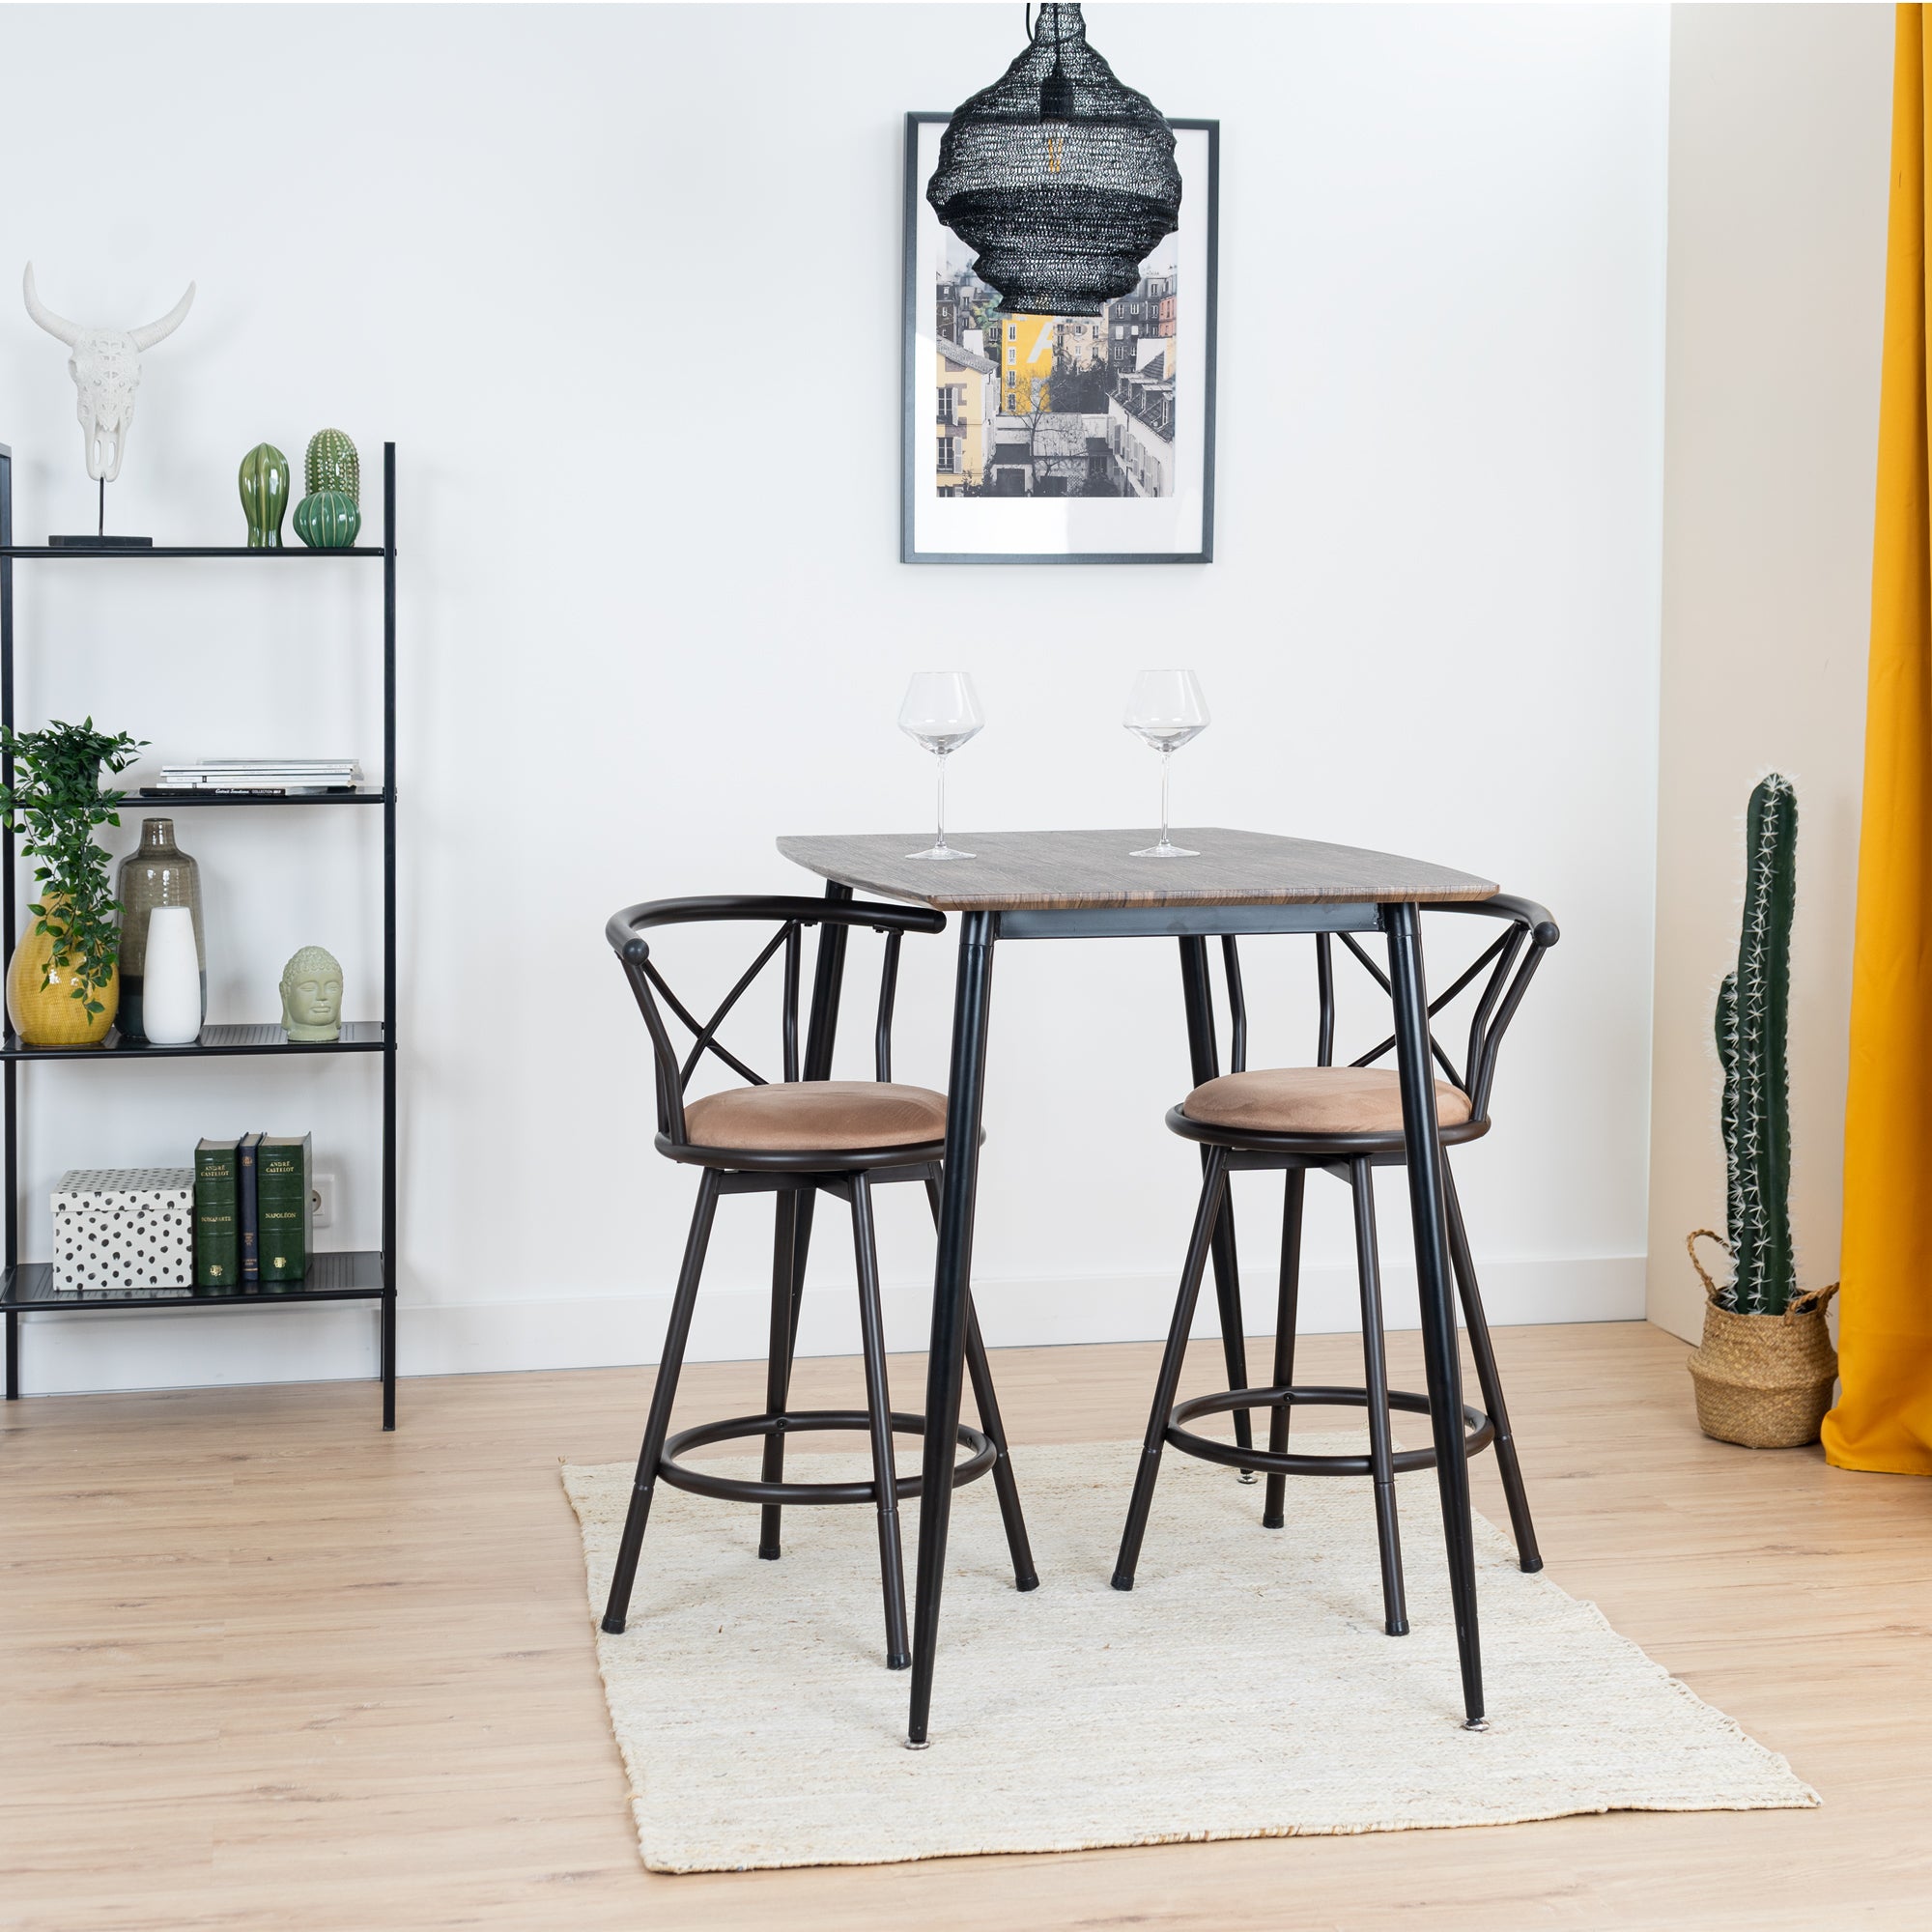 Set of 2 industrial style kitchen bar stools with metal legs 360° seat and footrest - HAILEY BROWN - 63 CM